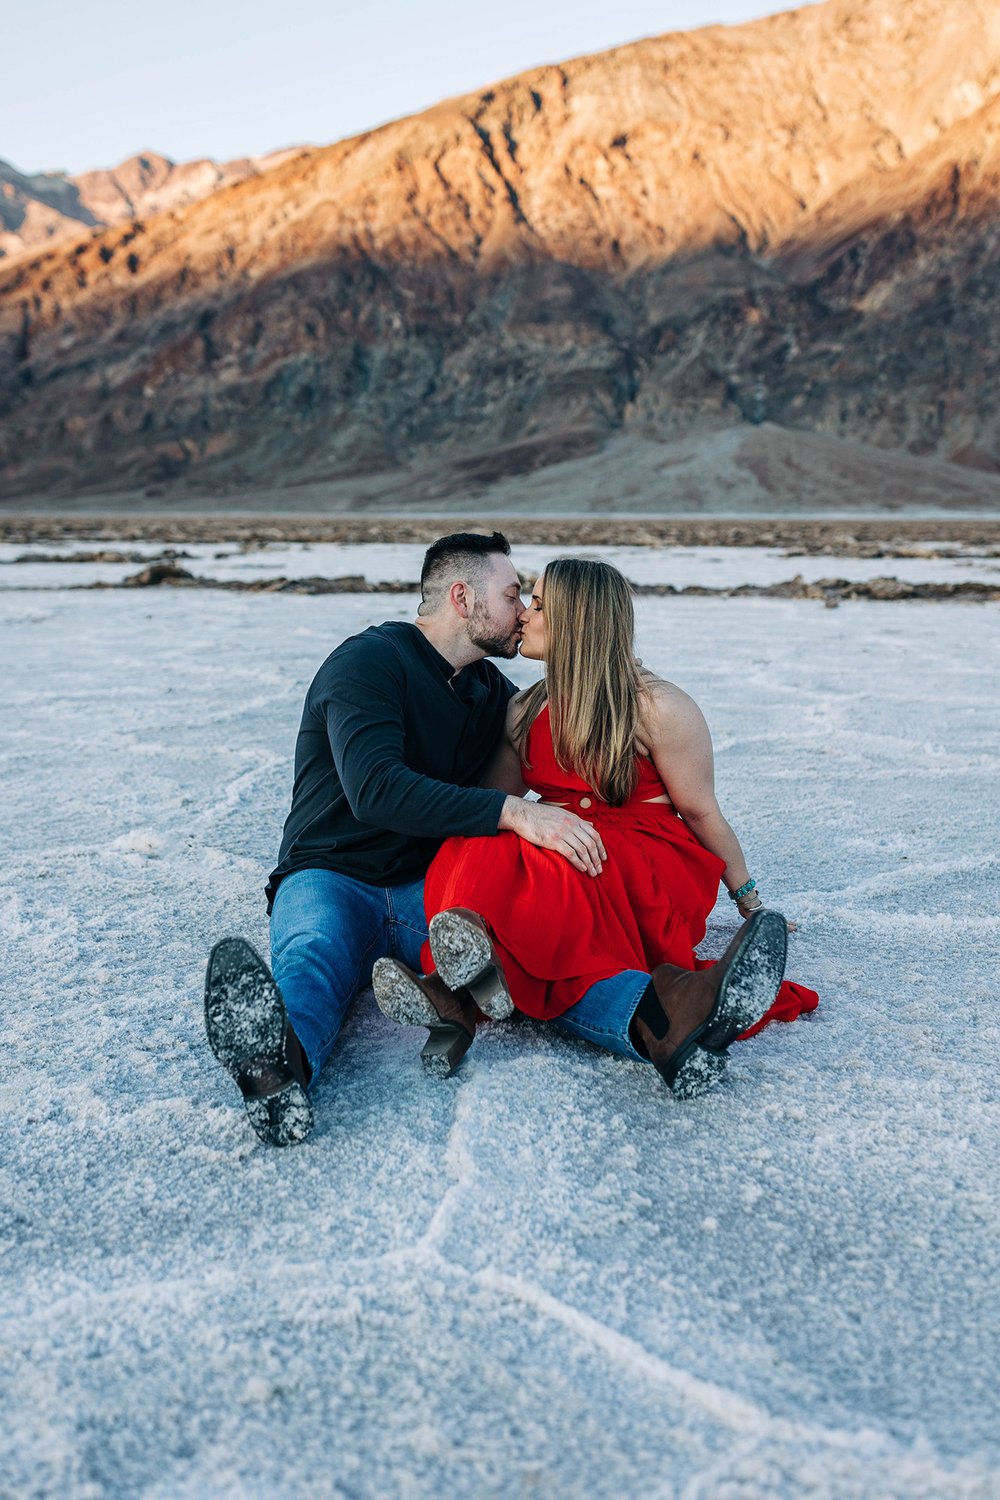 Alex and Aly sit together on the salt flats with a view of the mountains.